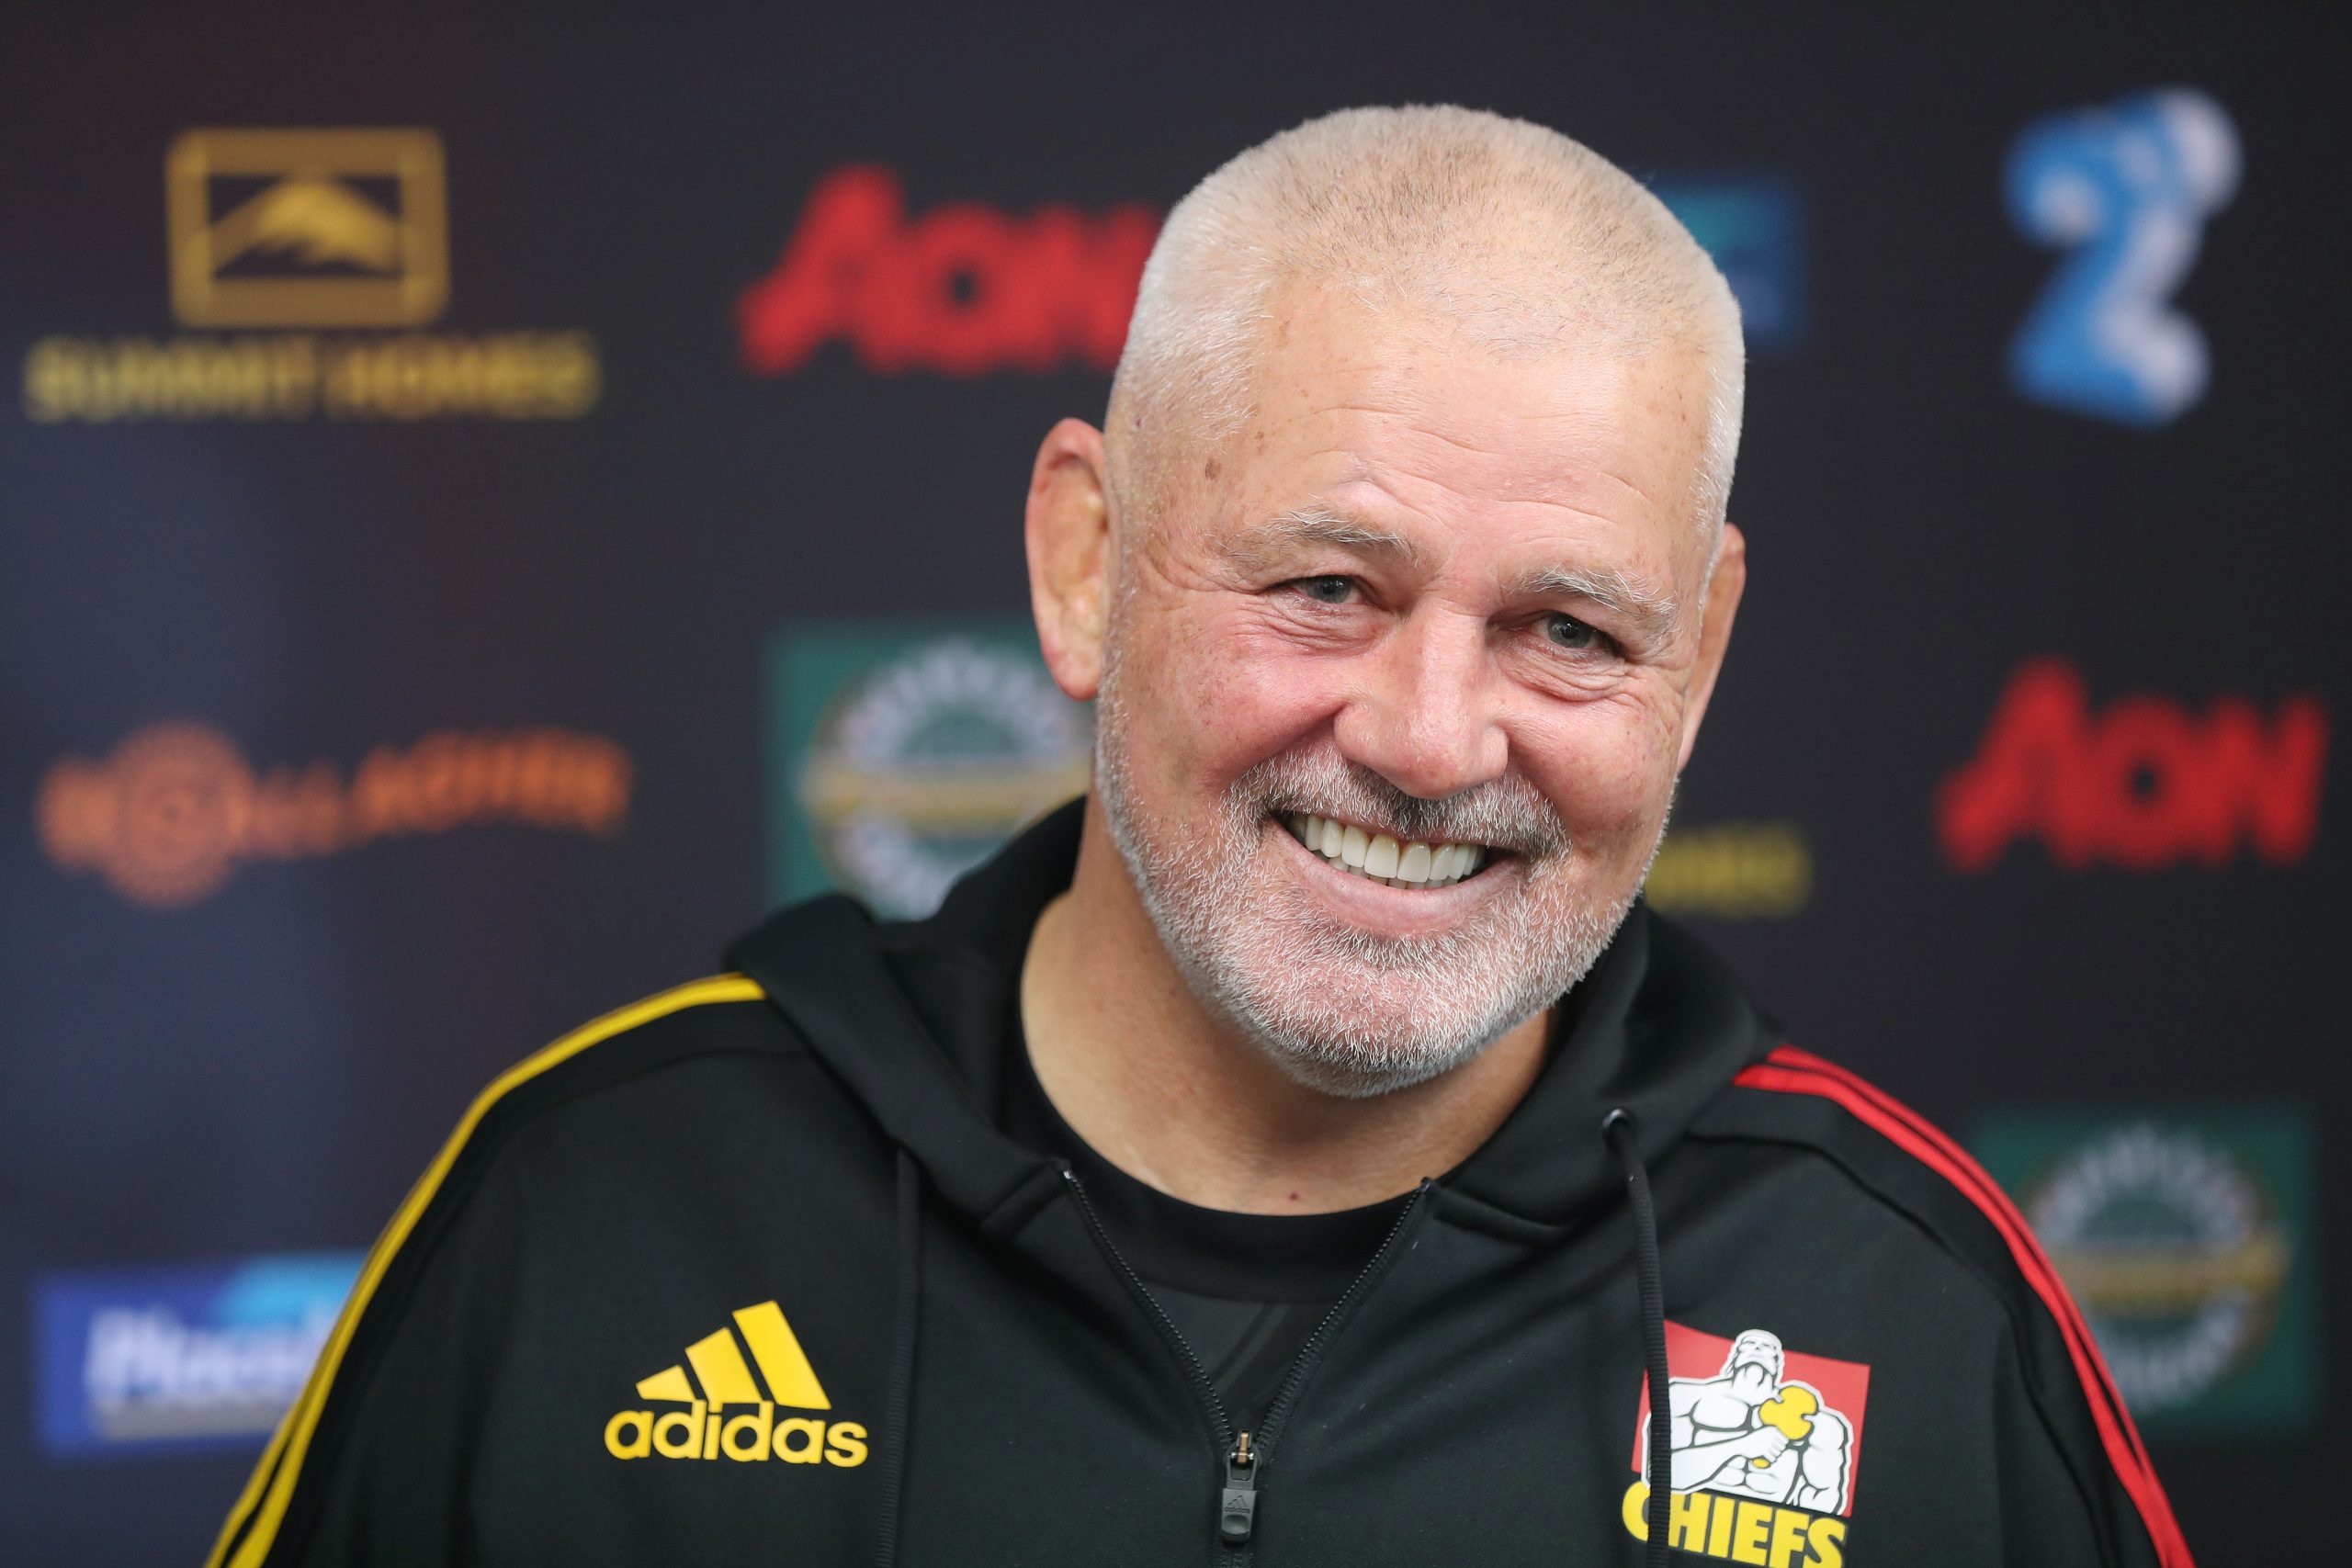 Warren Gatland, recently voted best rugby coach of the past 60 years by RW readers